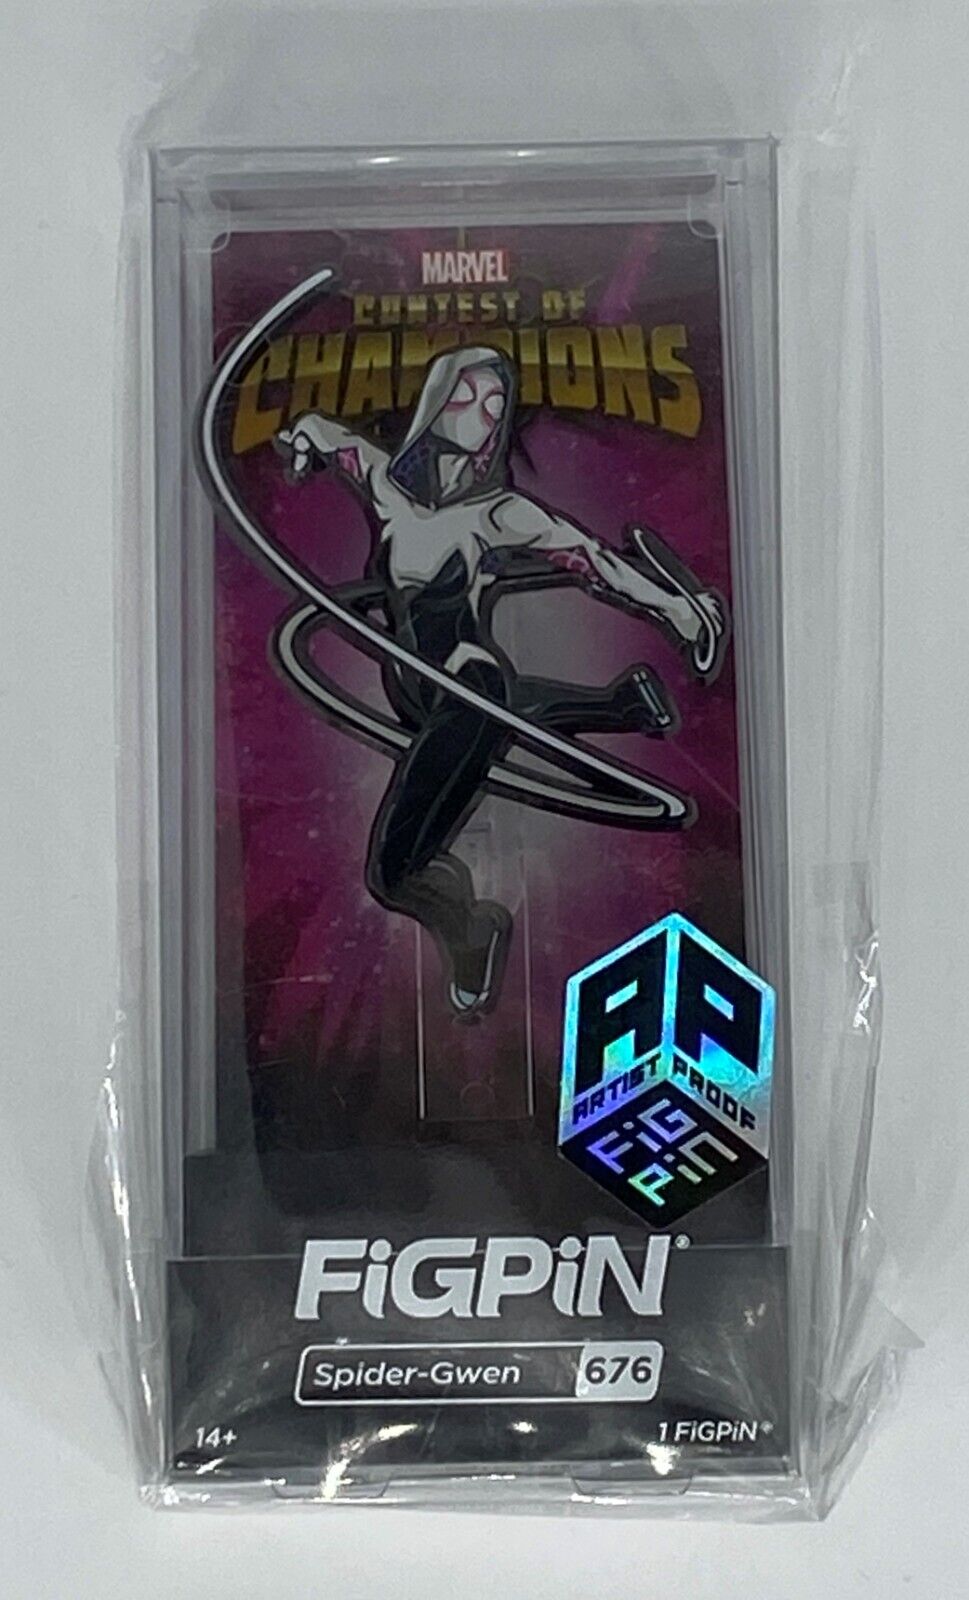 FiGPiN Artist Proof AP Pin Marvel Spider-Gwen #676 Contest of Champions